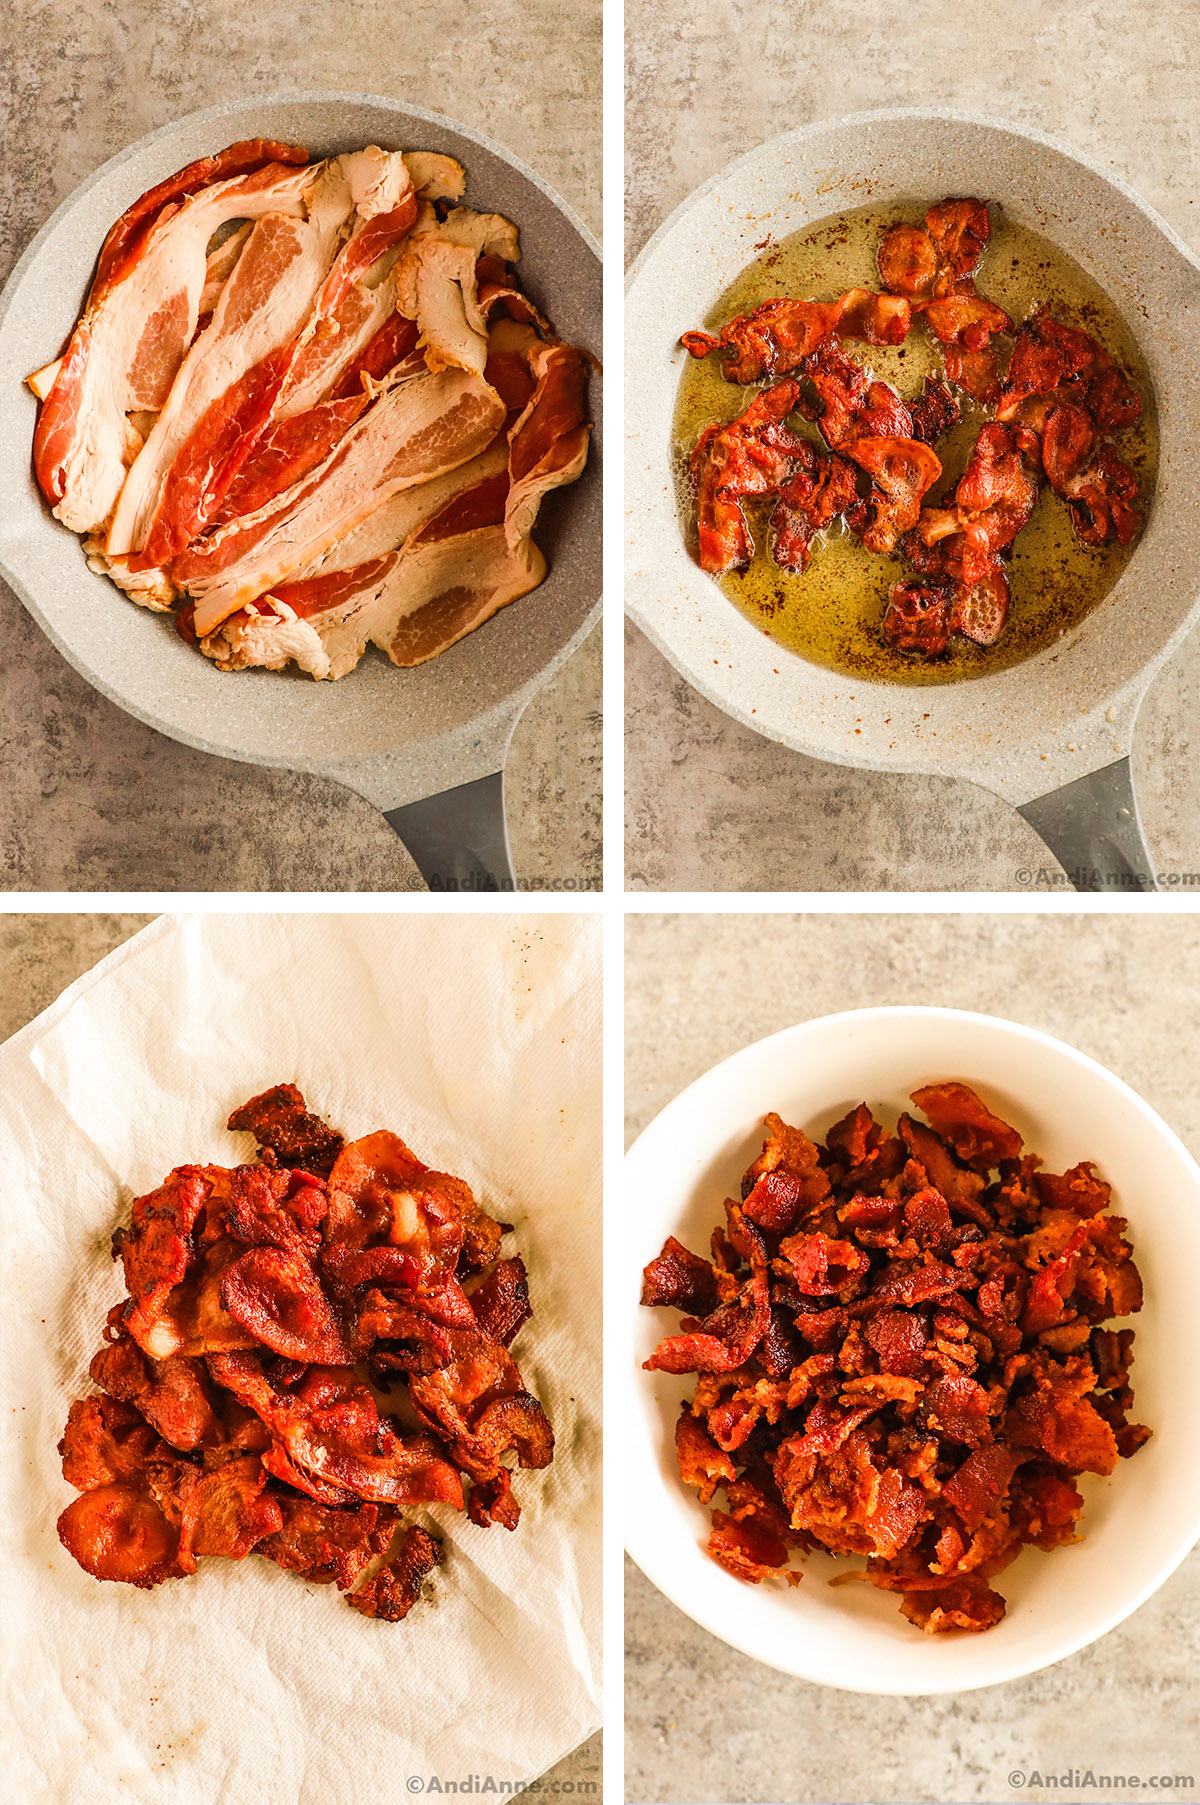 Four images of steps to make bacon. First two are frying pan with raw bacon strips, then cooked bacon. Third is crispy bacon on paper towel, fourth is bowl of crumbled bacon.